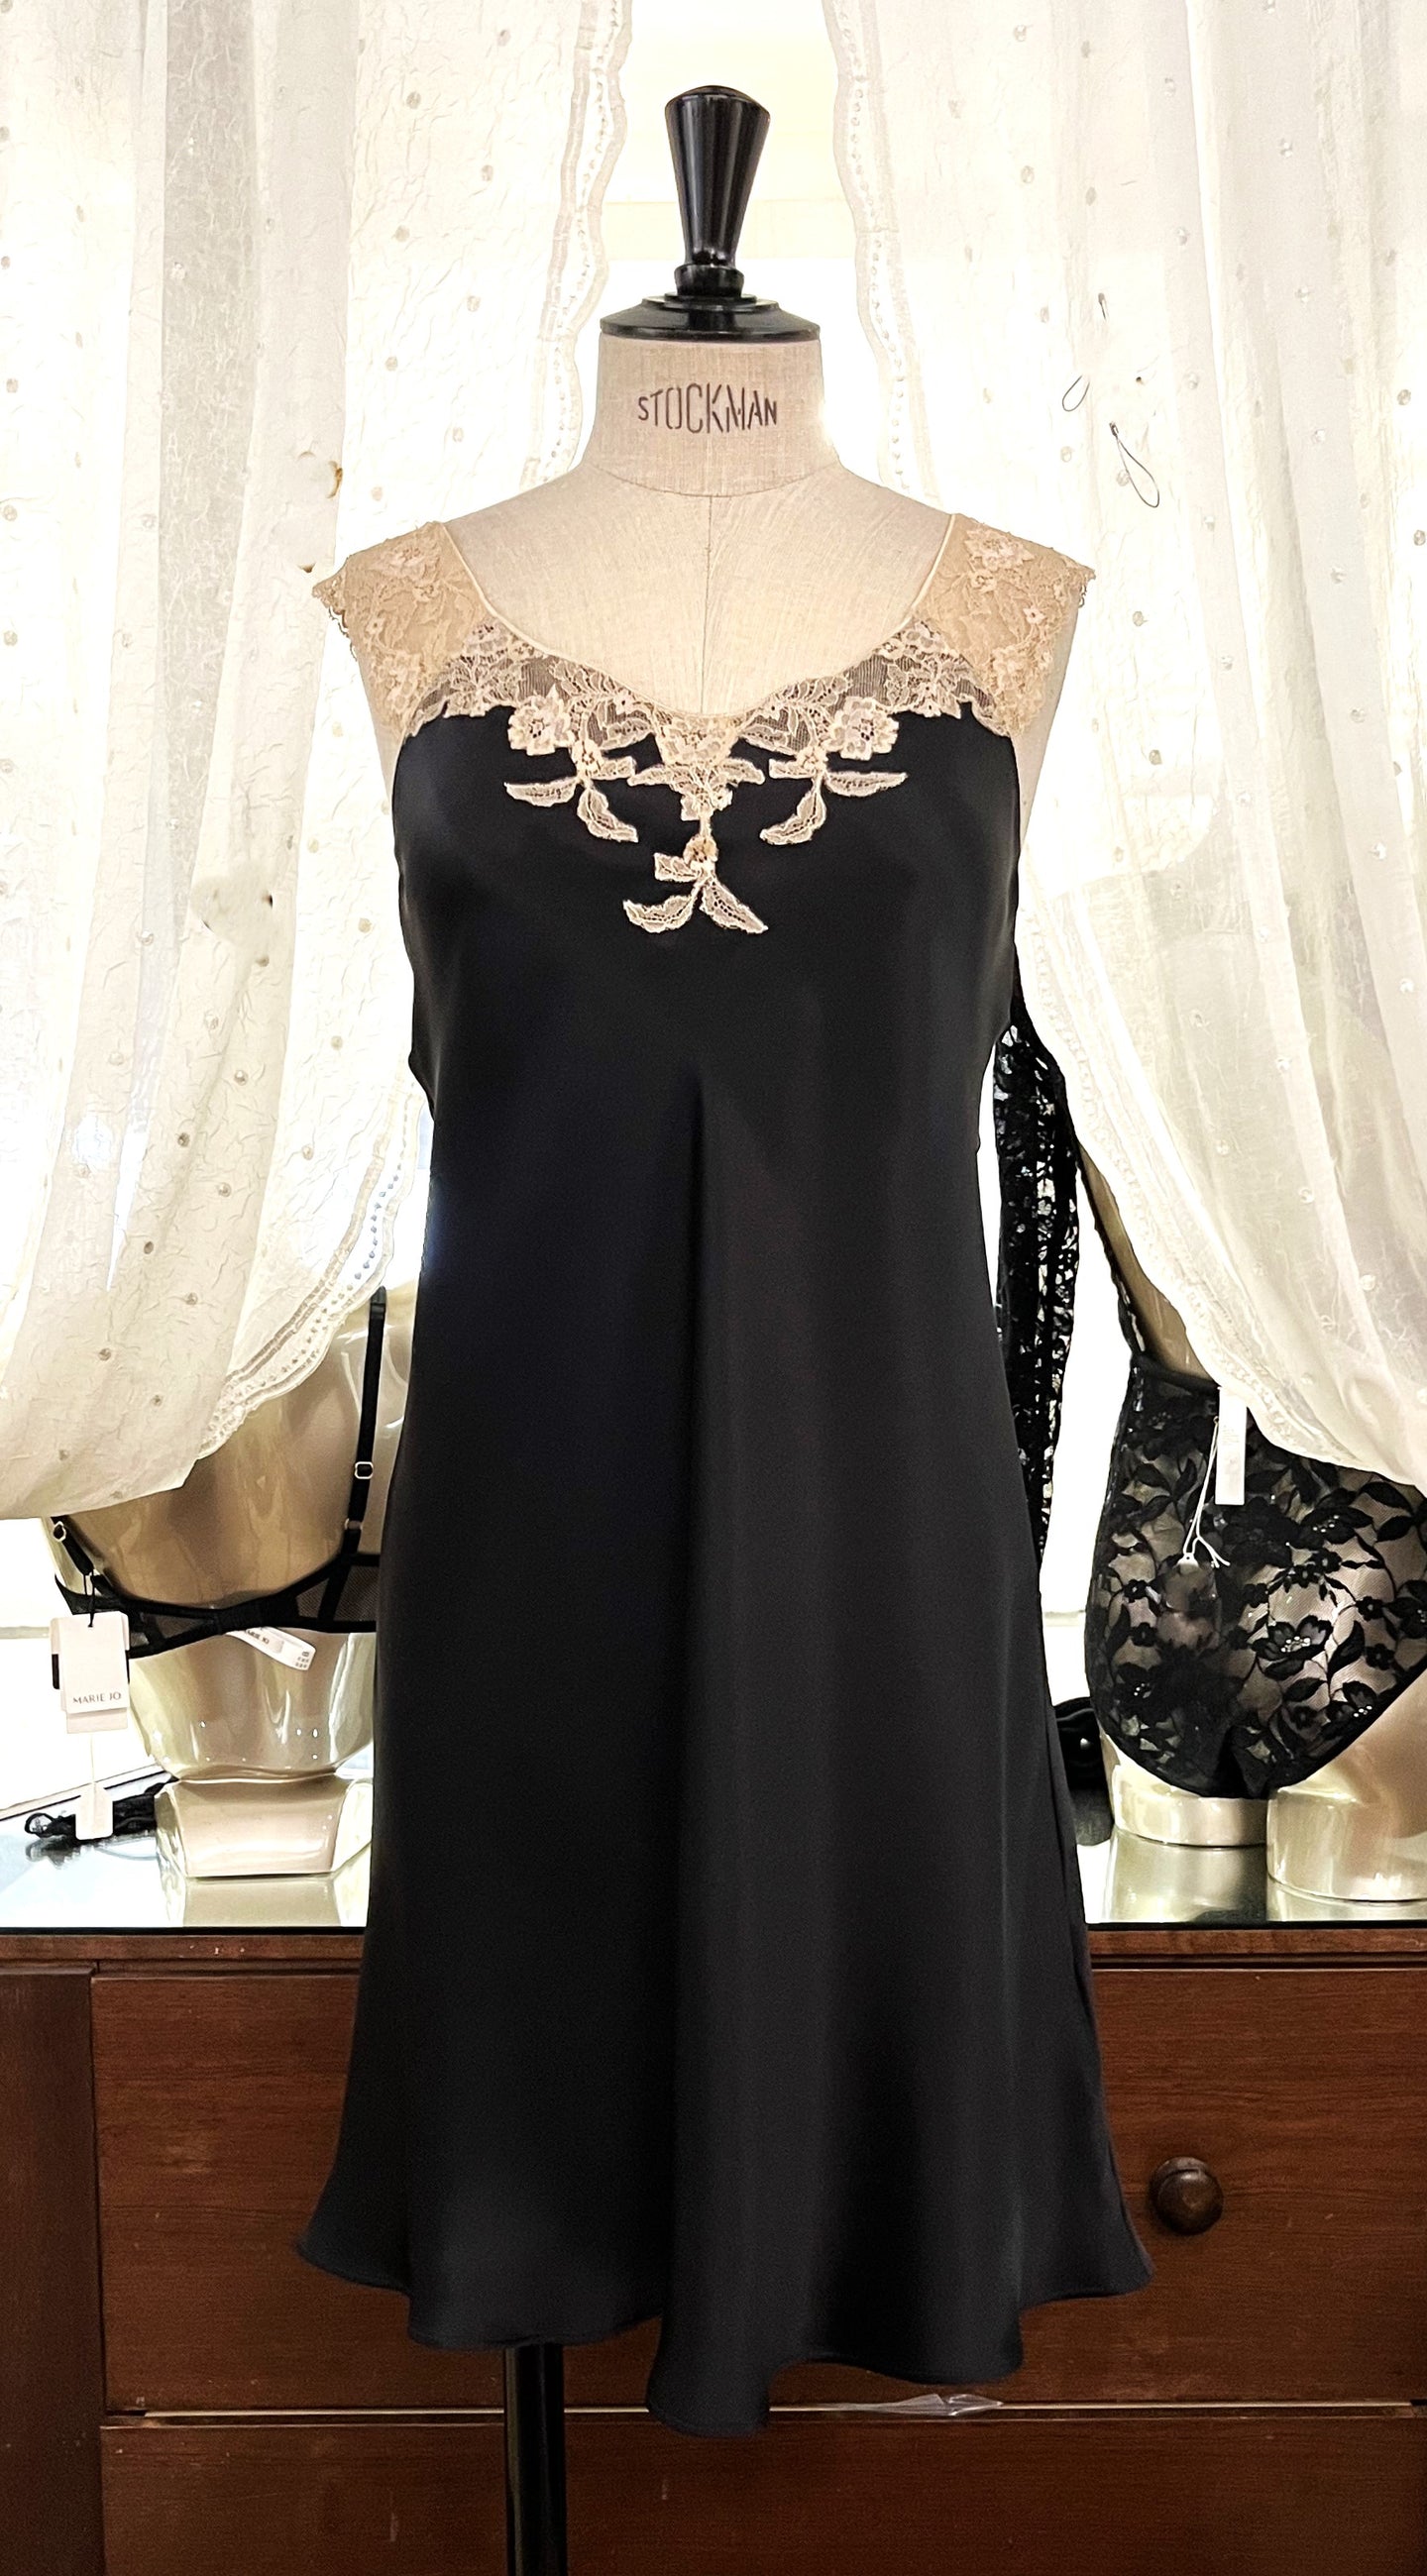 Black/Ecru. Classic, short night/slip. Made from 100% silk satin. The wide lace straps have a gentle elasticity for fit and comfort.  Appliqué lace detail continues to the round neck. Cut on the bias for movement and swing. This garment is perfect for sleepwear or loungewear. Generous sizing, if in doubt select the smaller size.   100% Silk Satin. Lace: 78% Nylon, 16% Elastane, 6% Polyester. Made in Italy. Machine washable.